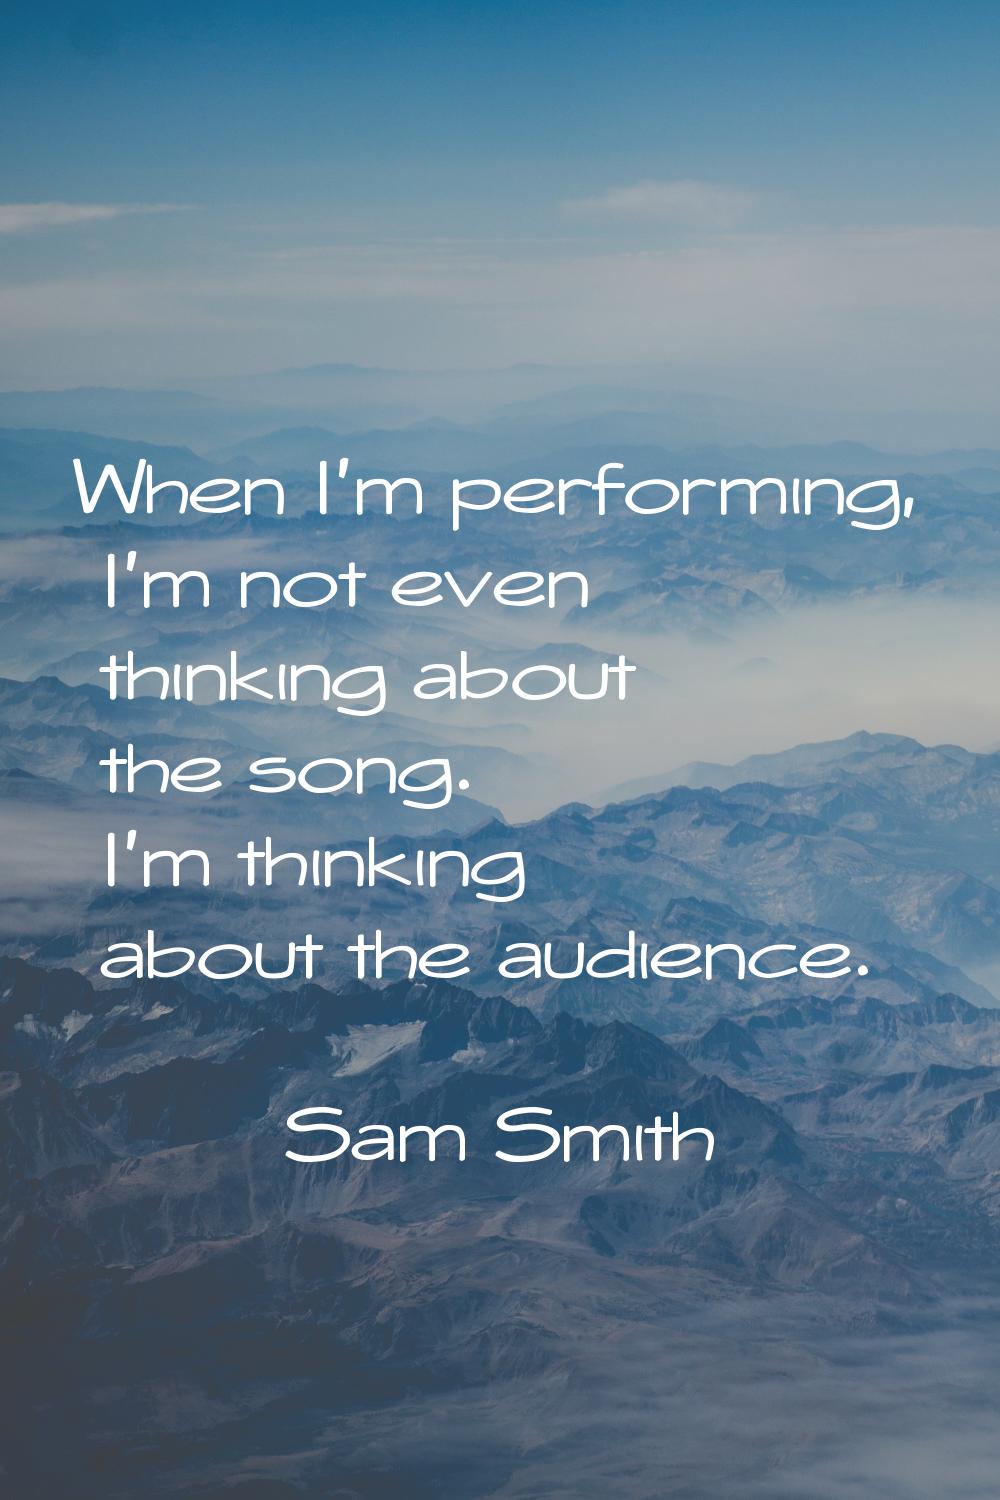 When I'm performing, I'm not even thinking about the song. I'm thinking about the audience.